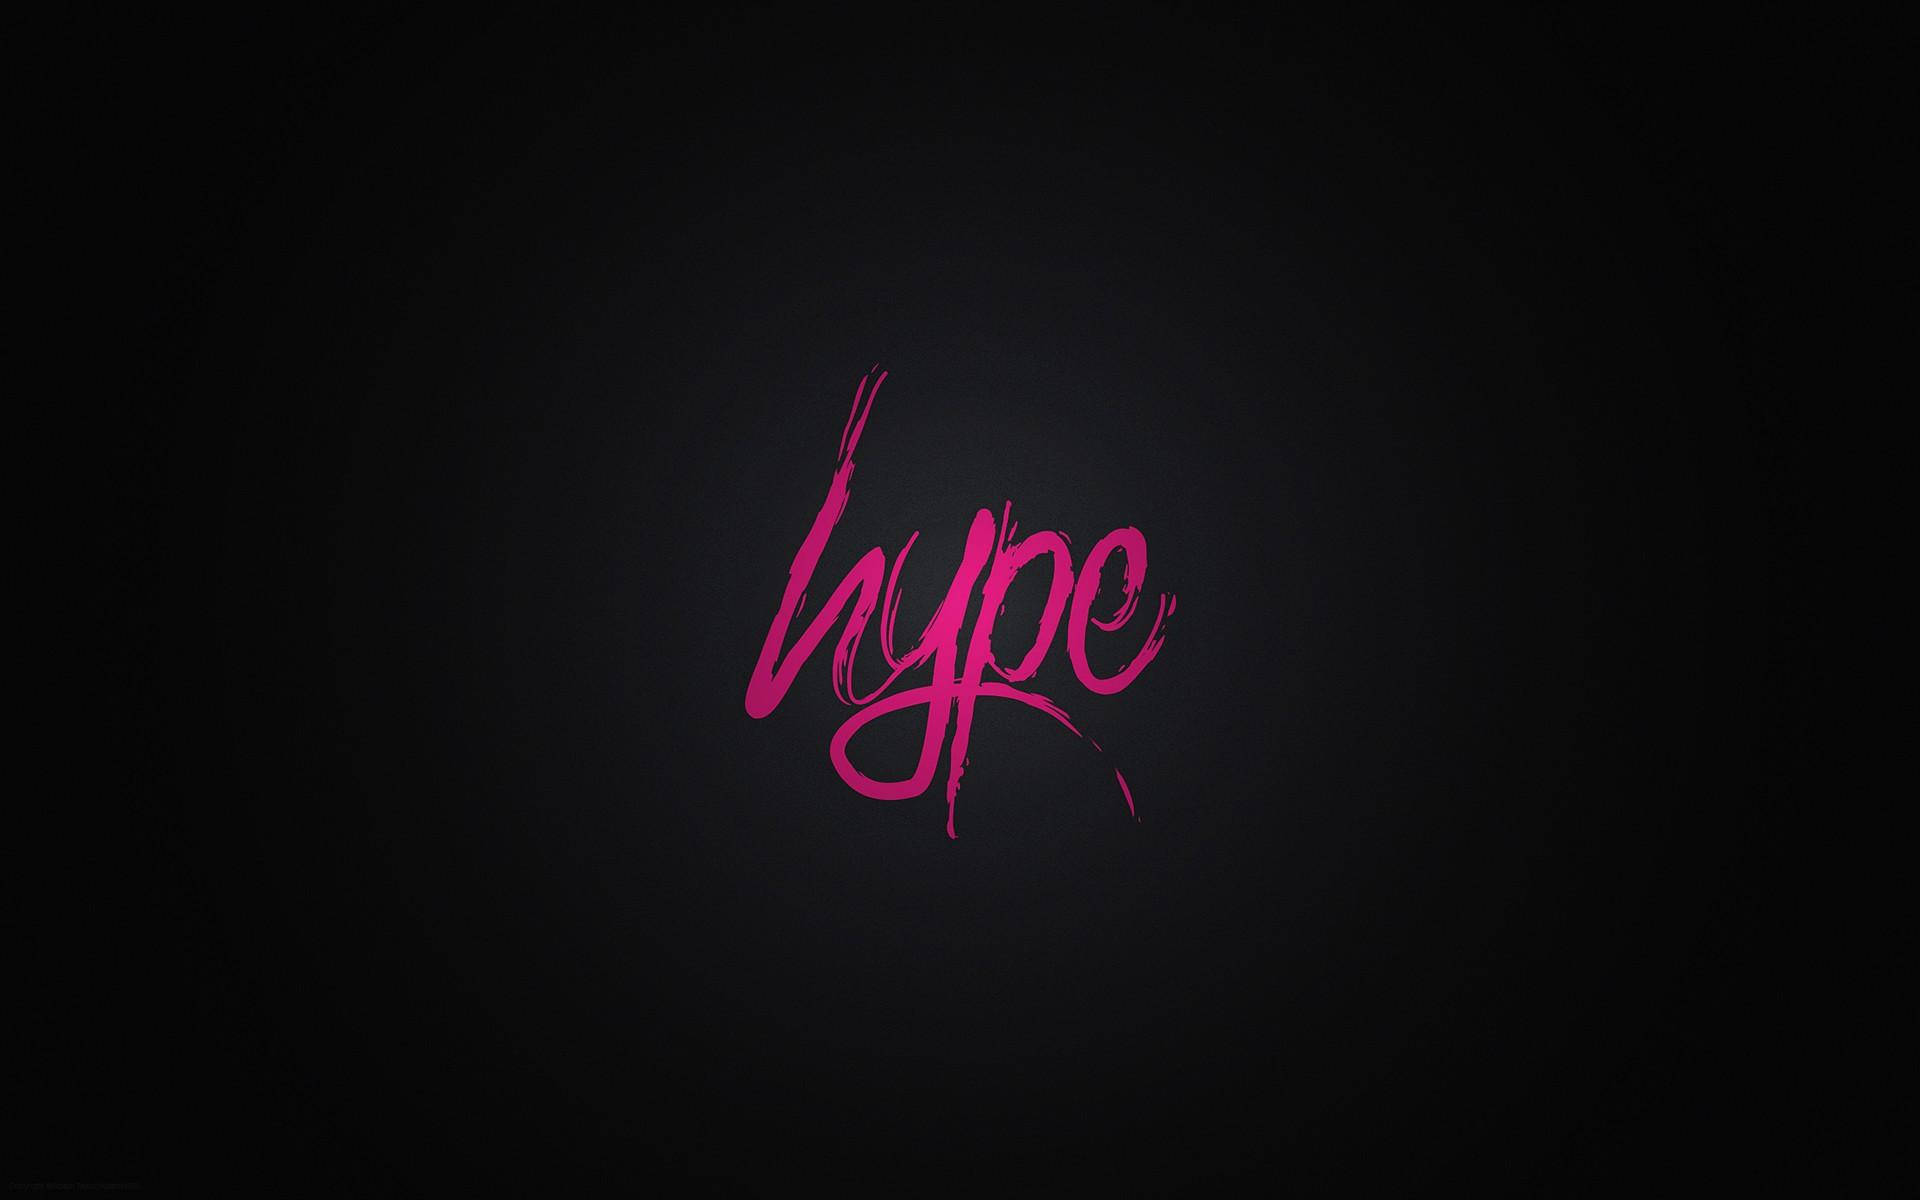 Black And Pink Aesthetic Hype Typography Background